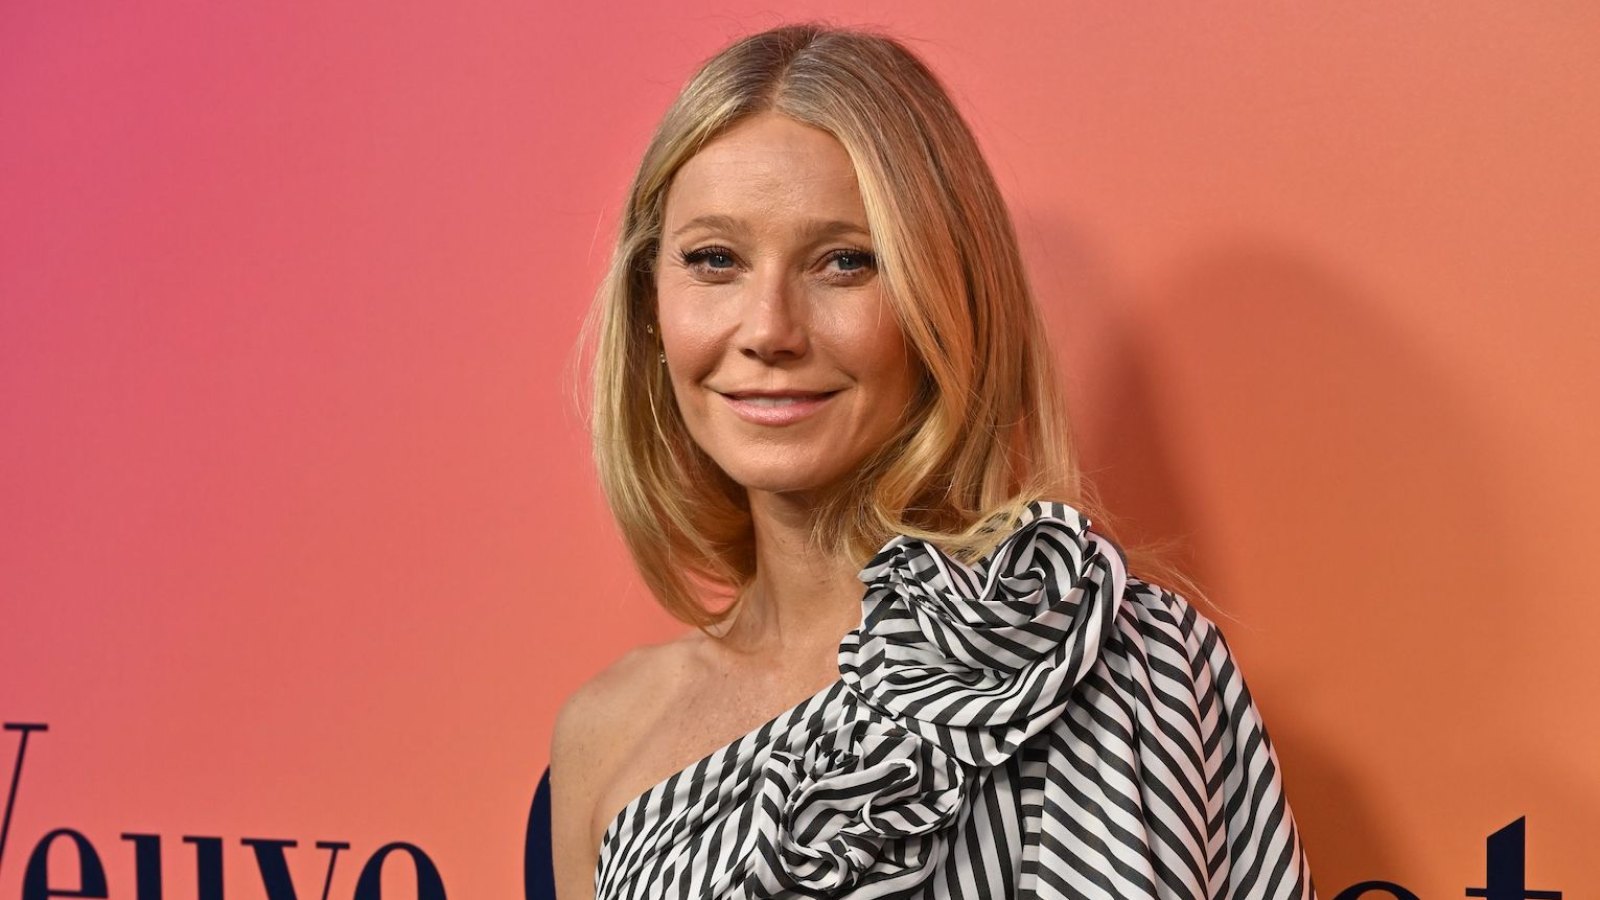 Gwyneth Paltrow Recalls ‘Doing Cocaine,’ Dancing on Tables While Partying in the ‘90s